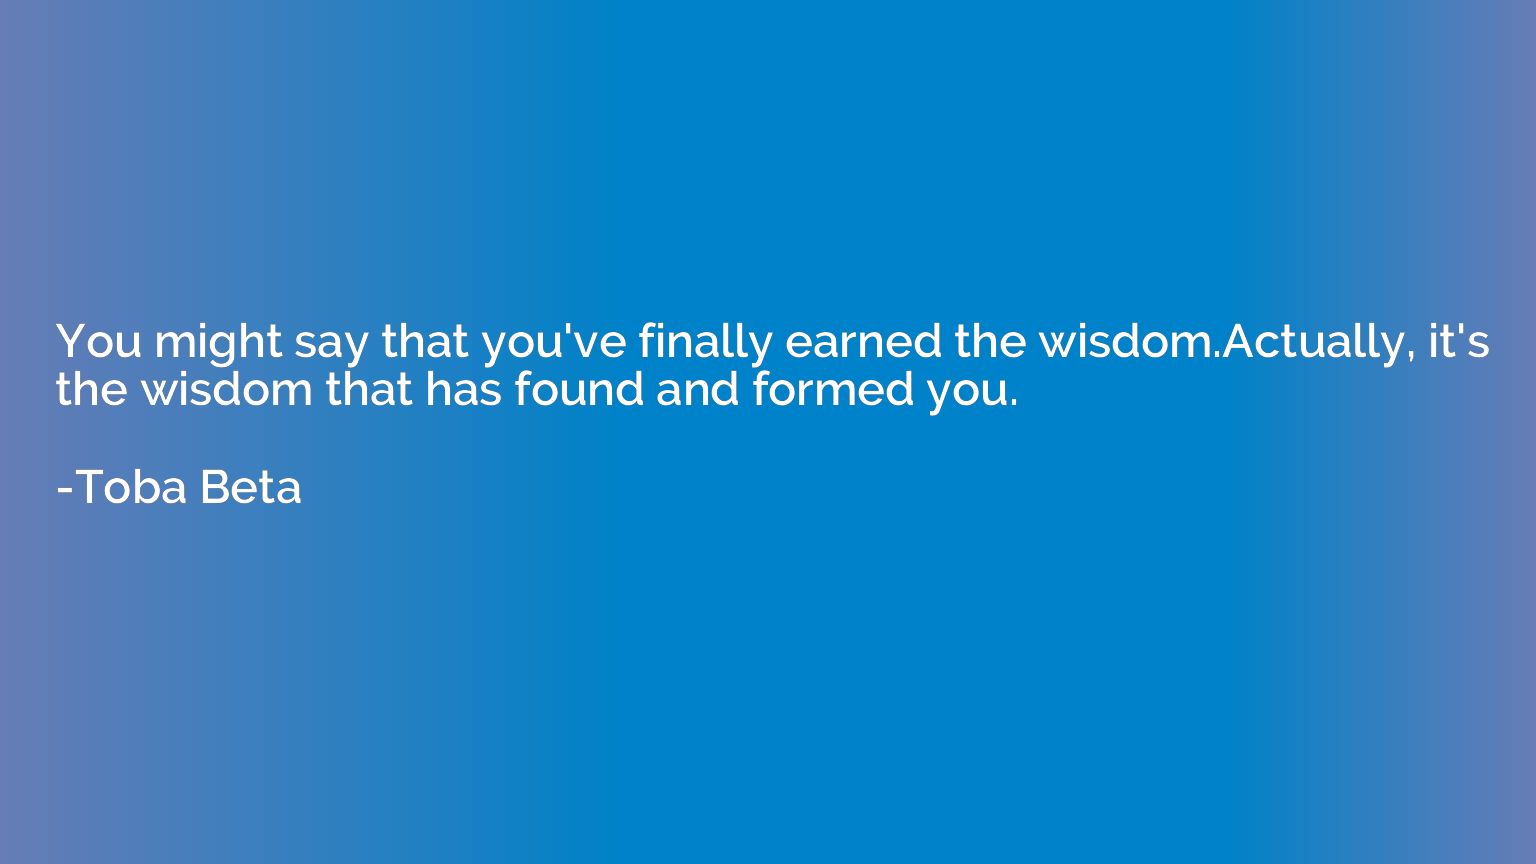 You might say that you've finally earned the wisdom.Actually